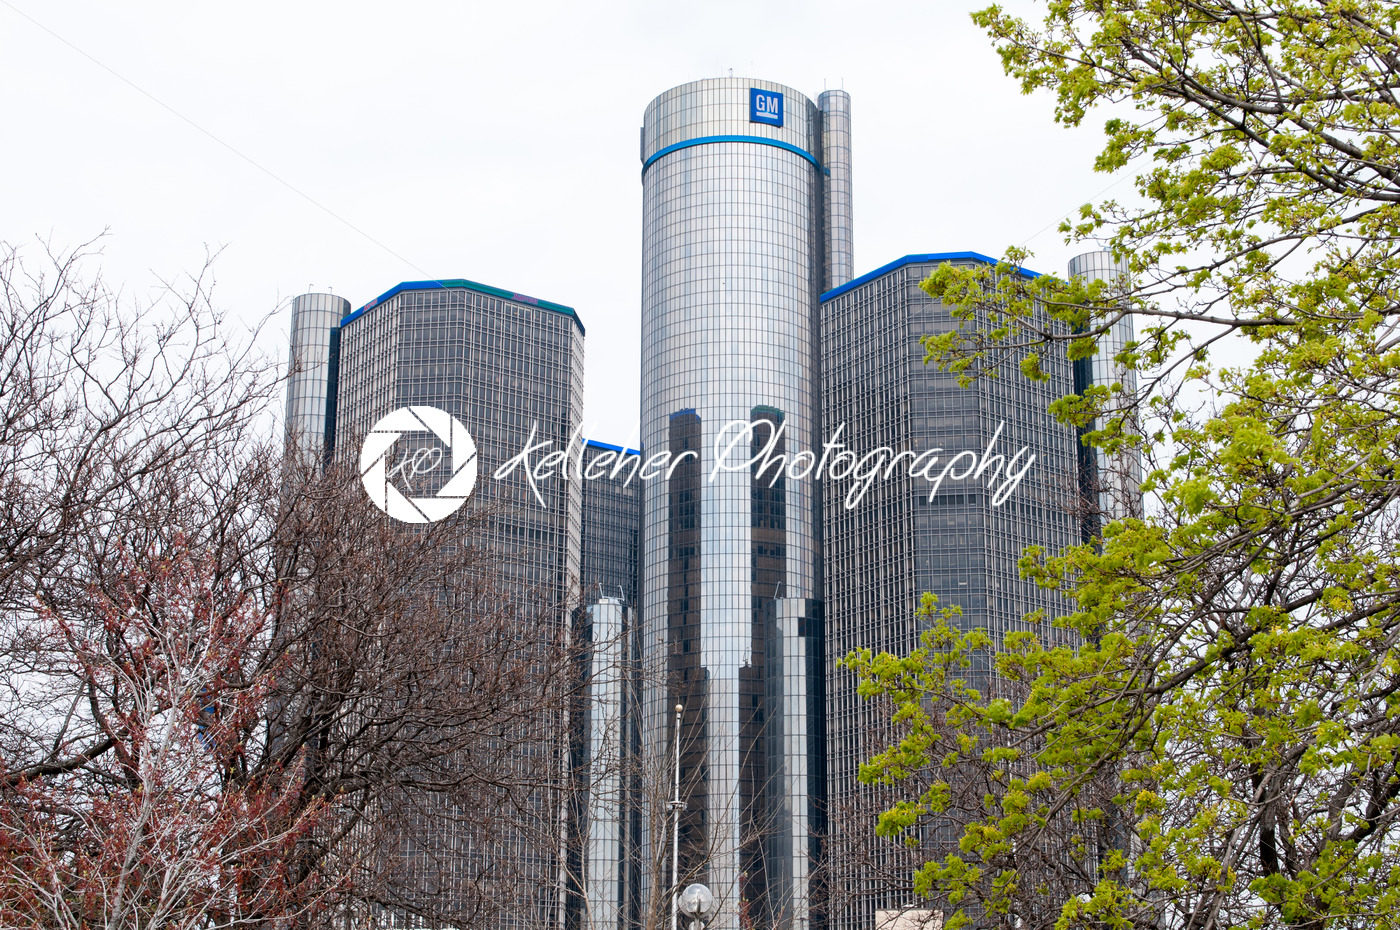 DETROIT, MI – MAY 8: General Motors World Headquarters where the majority of GM operations are based in downtown Detroit on May 8, 2014 - Kelleher Photography Store